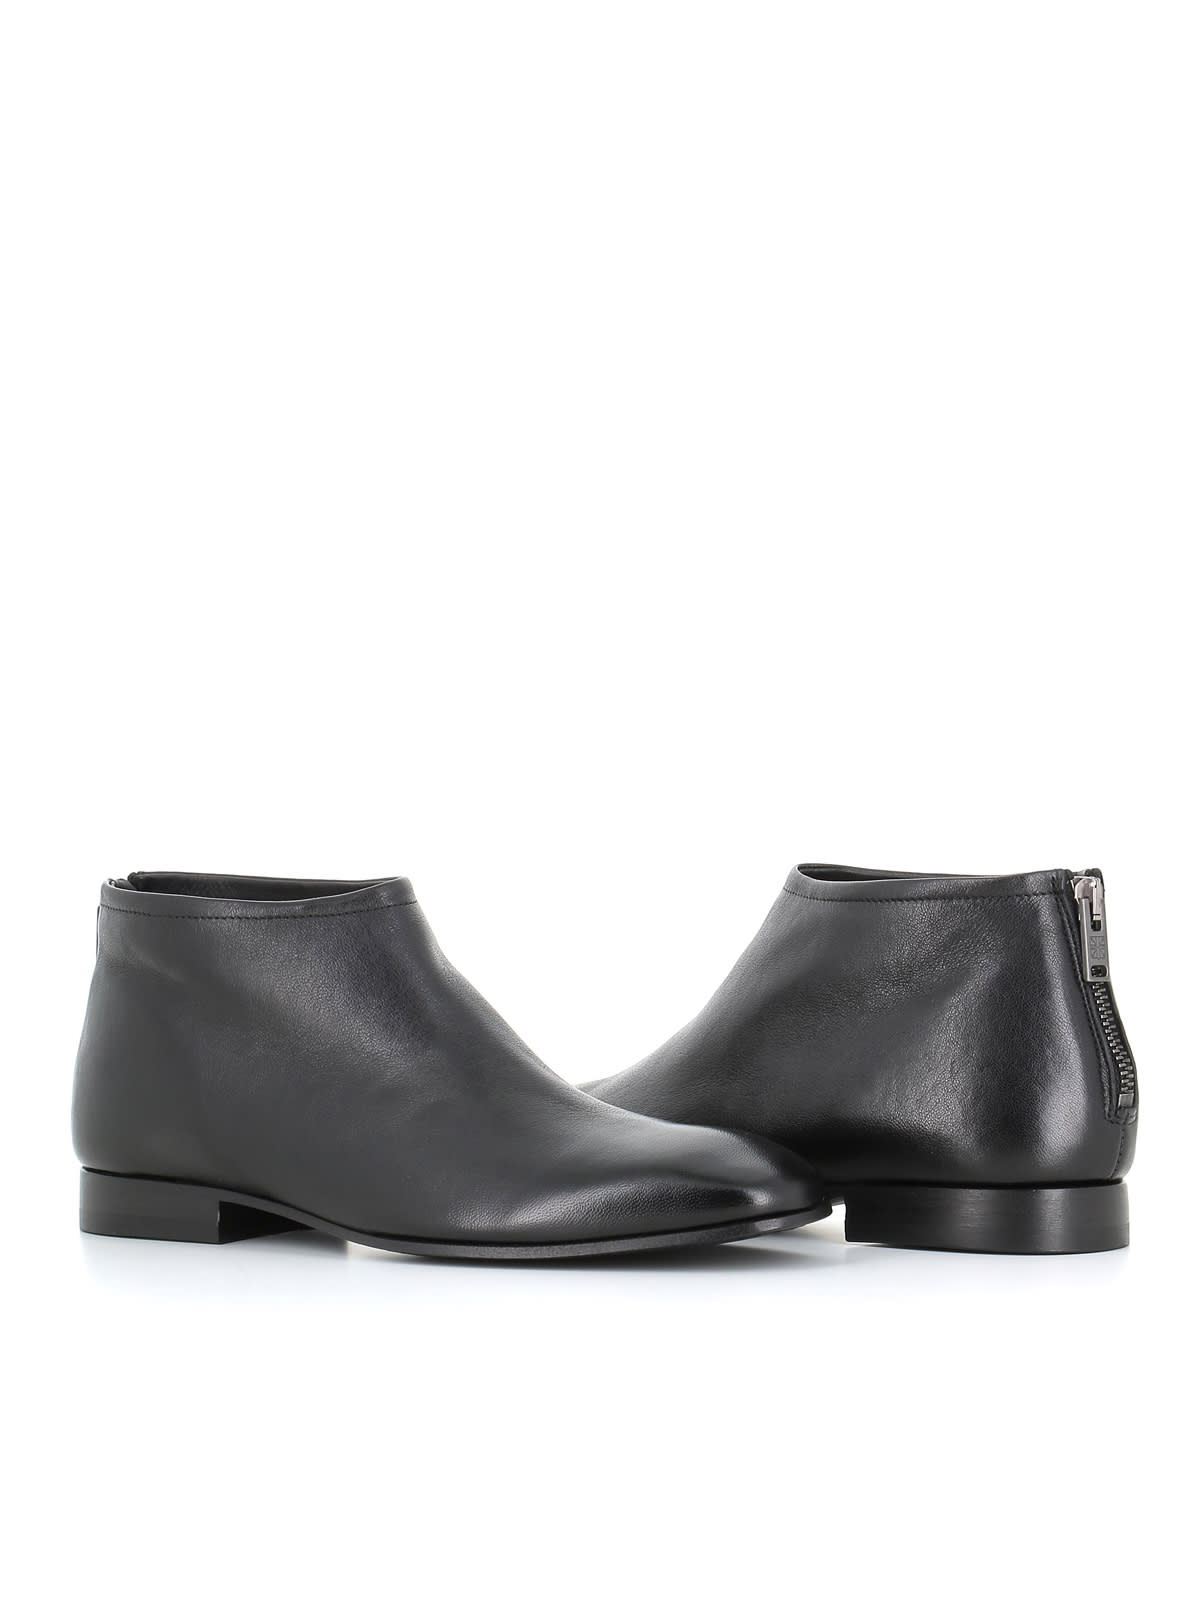 Pantanetti Ankle Boot 17120d In Black